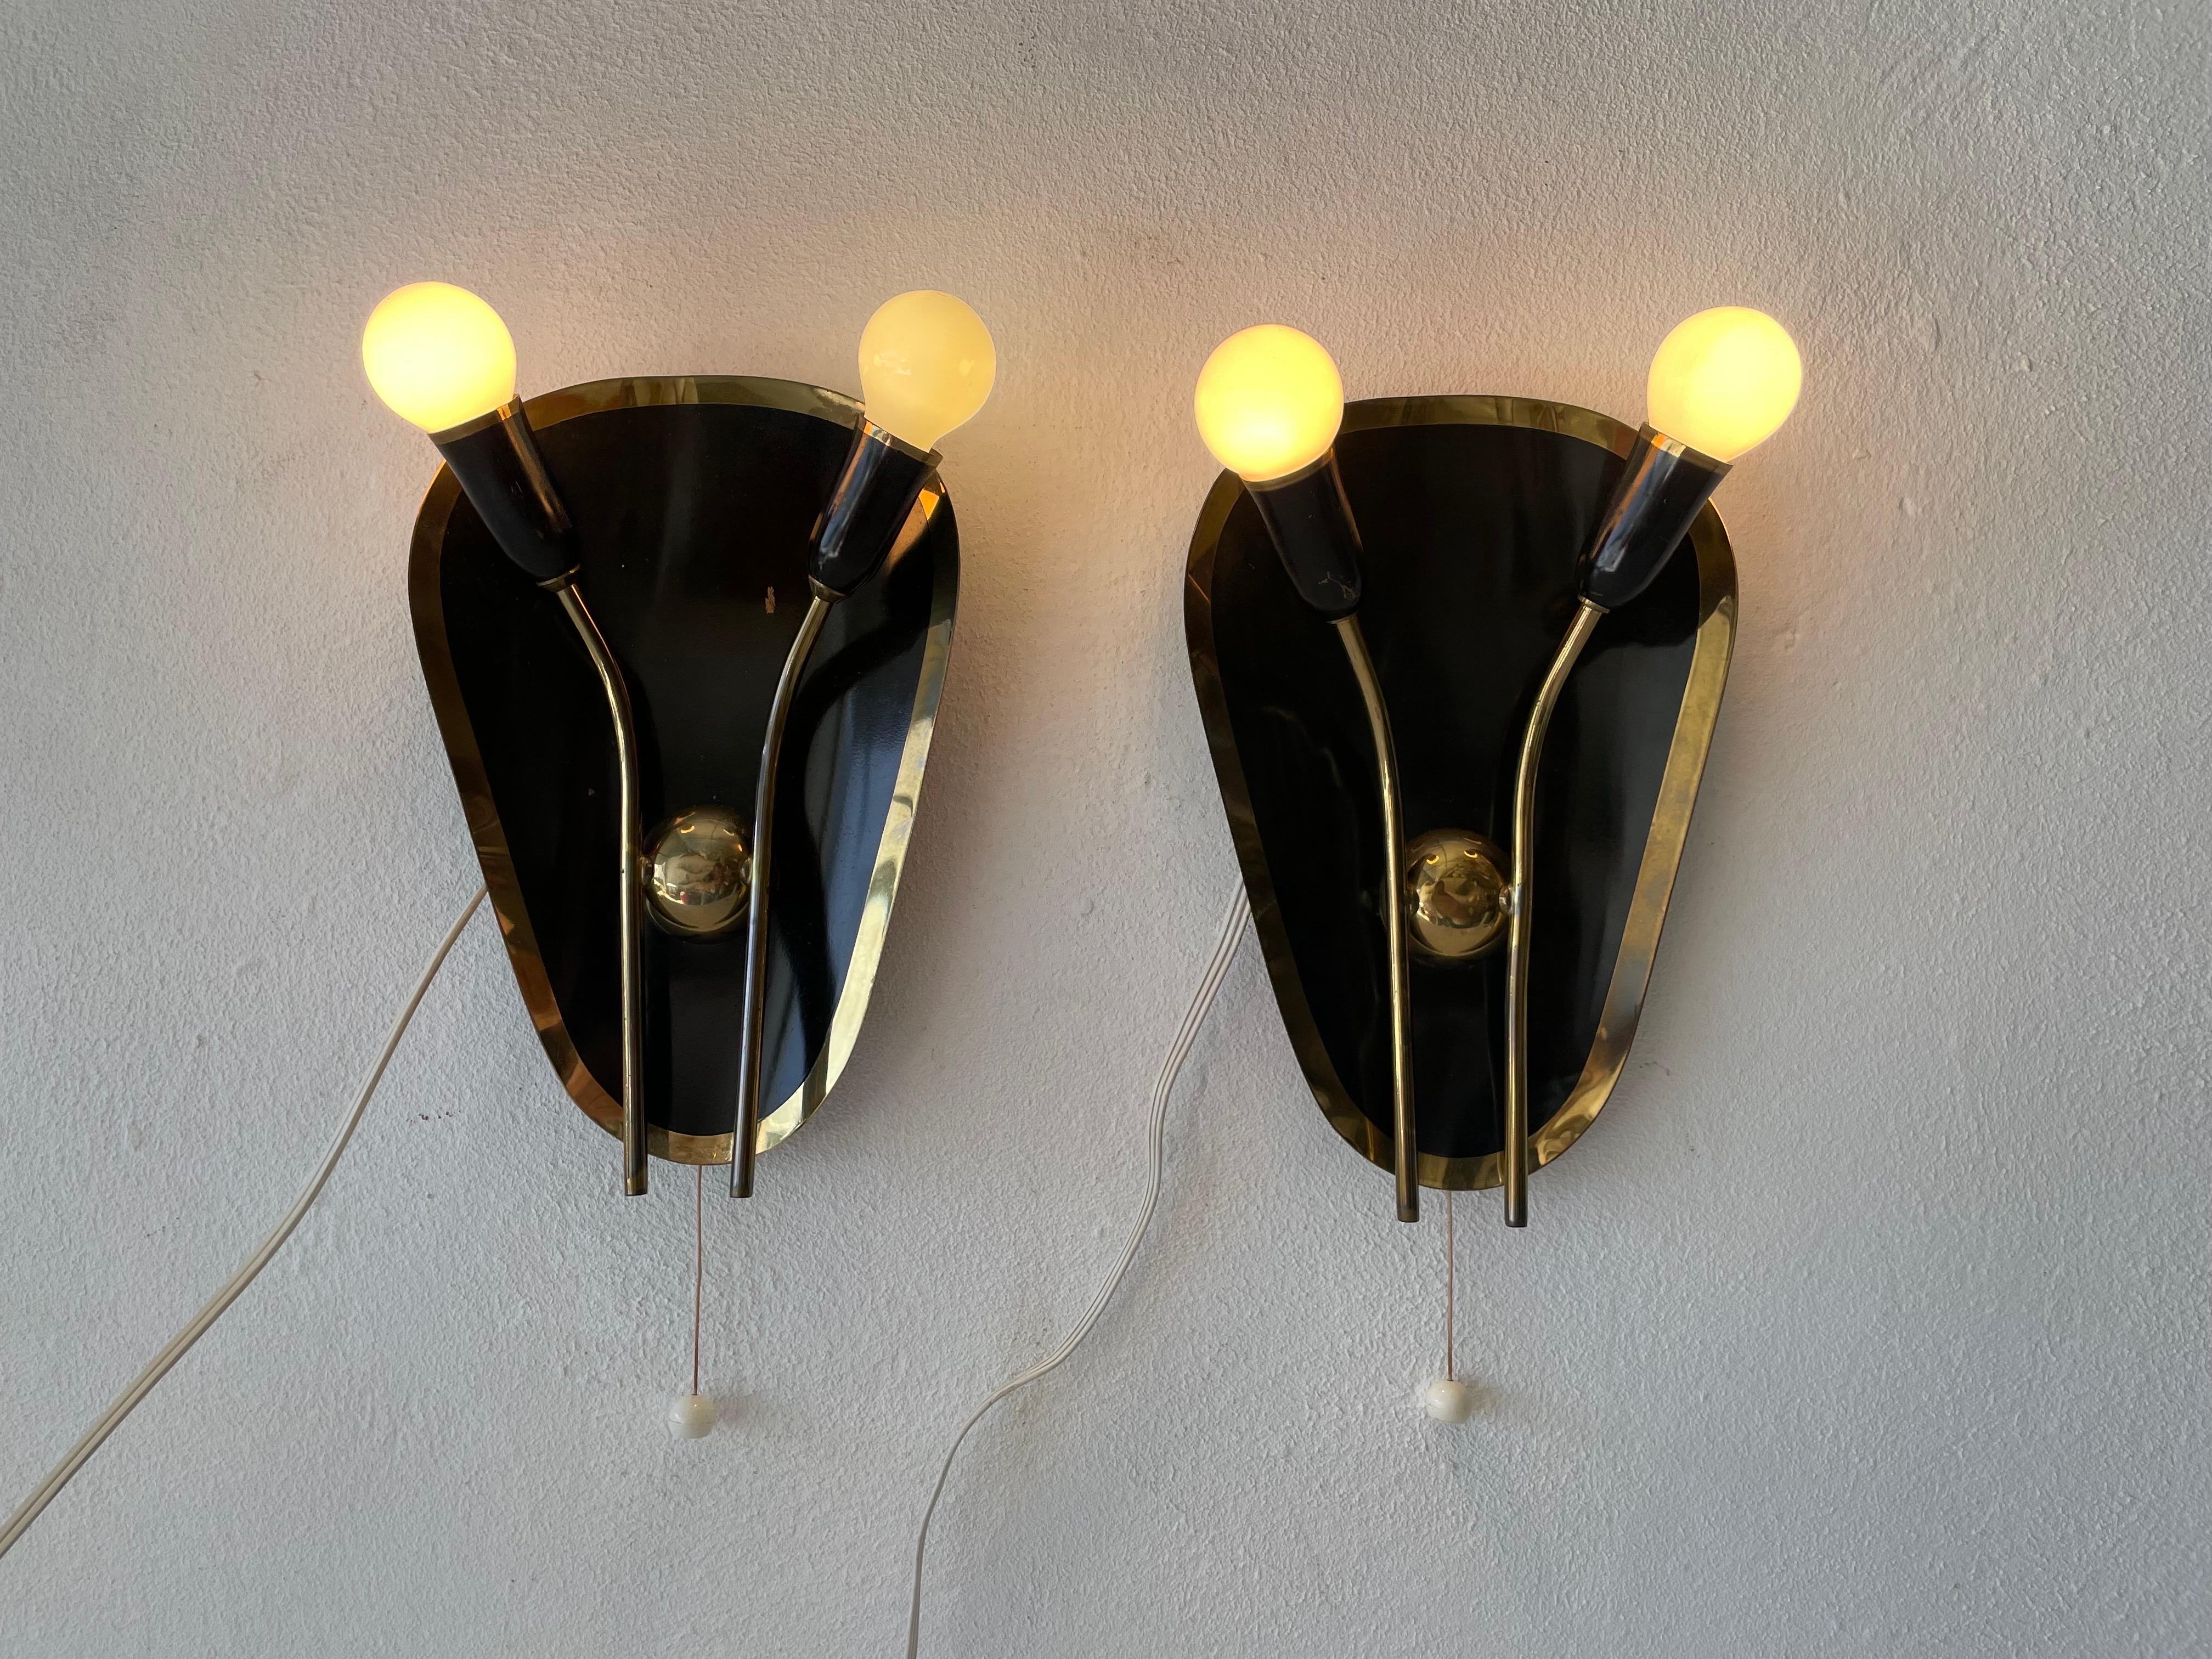 Exclusive Atomic Design Brass Black Metal Pair of Sconces, 1950s, Germany For Sale 4